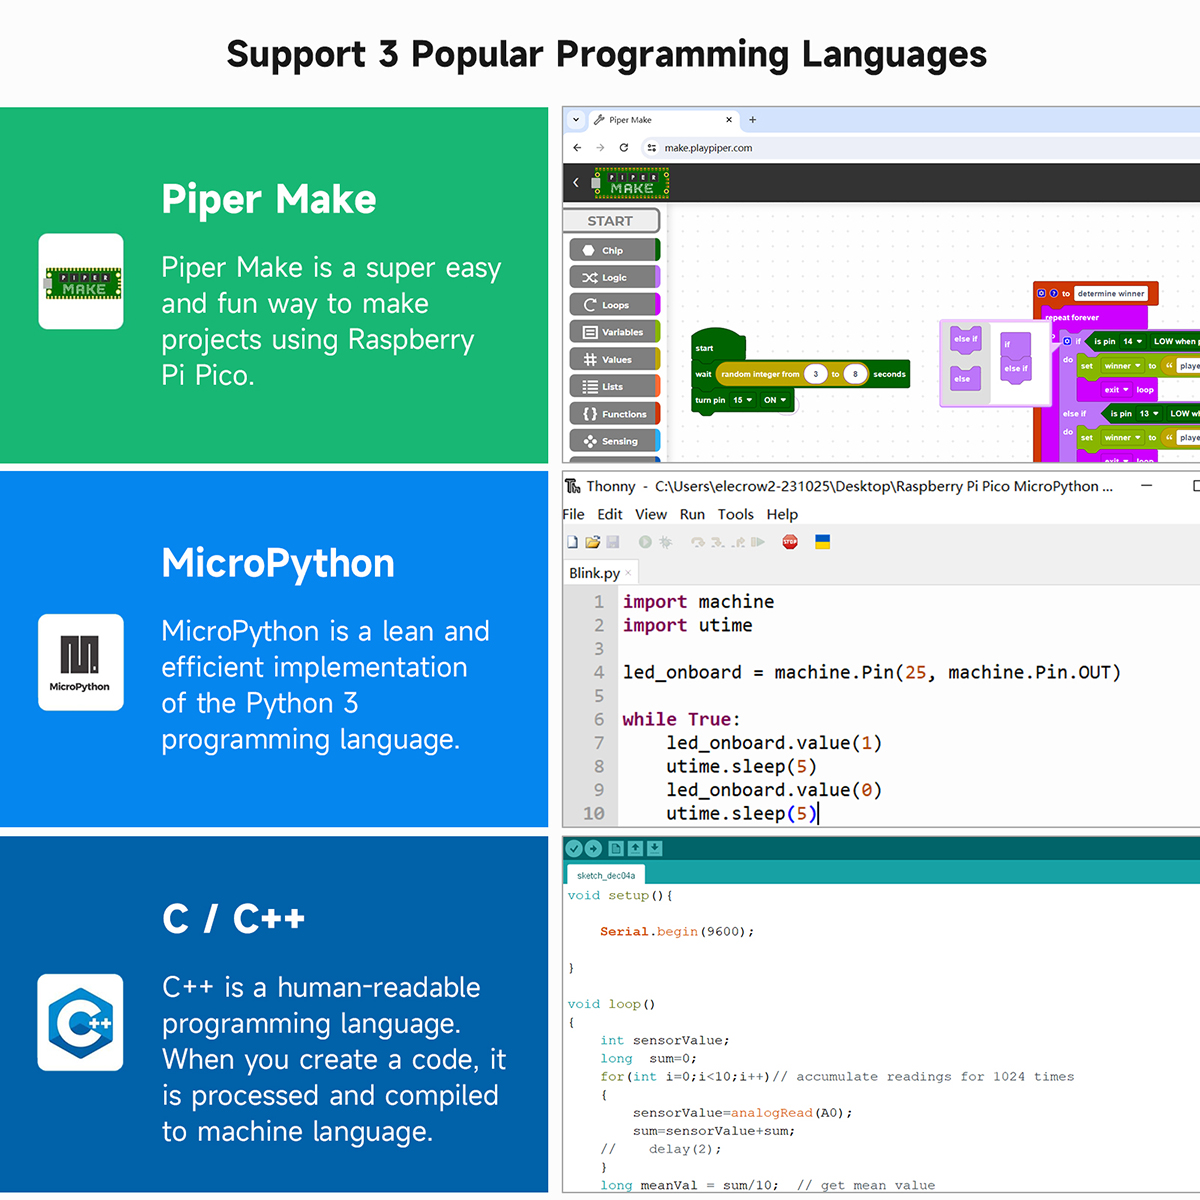 Advanced Kit for Pico Programming supports 3 languages